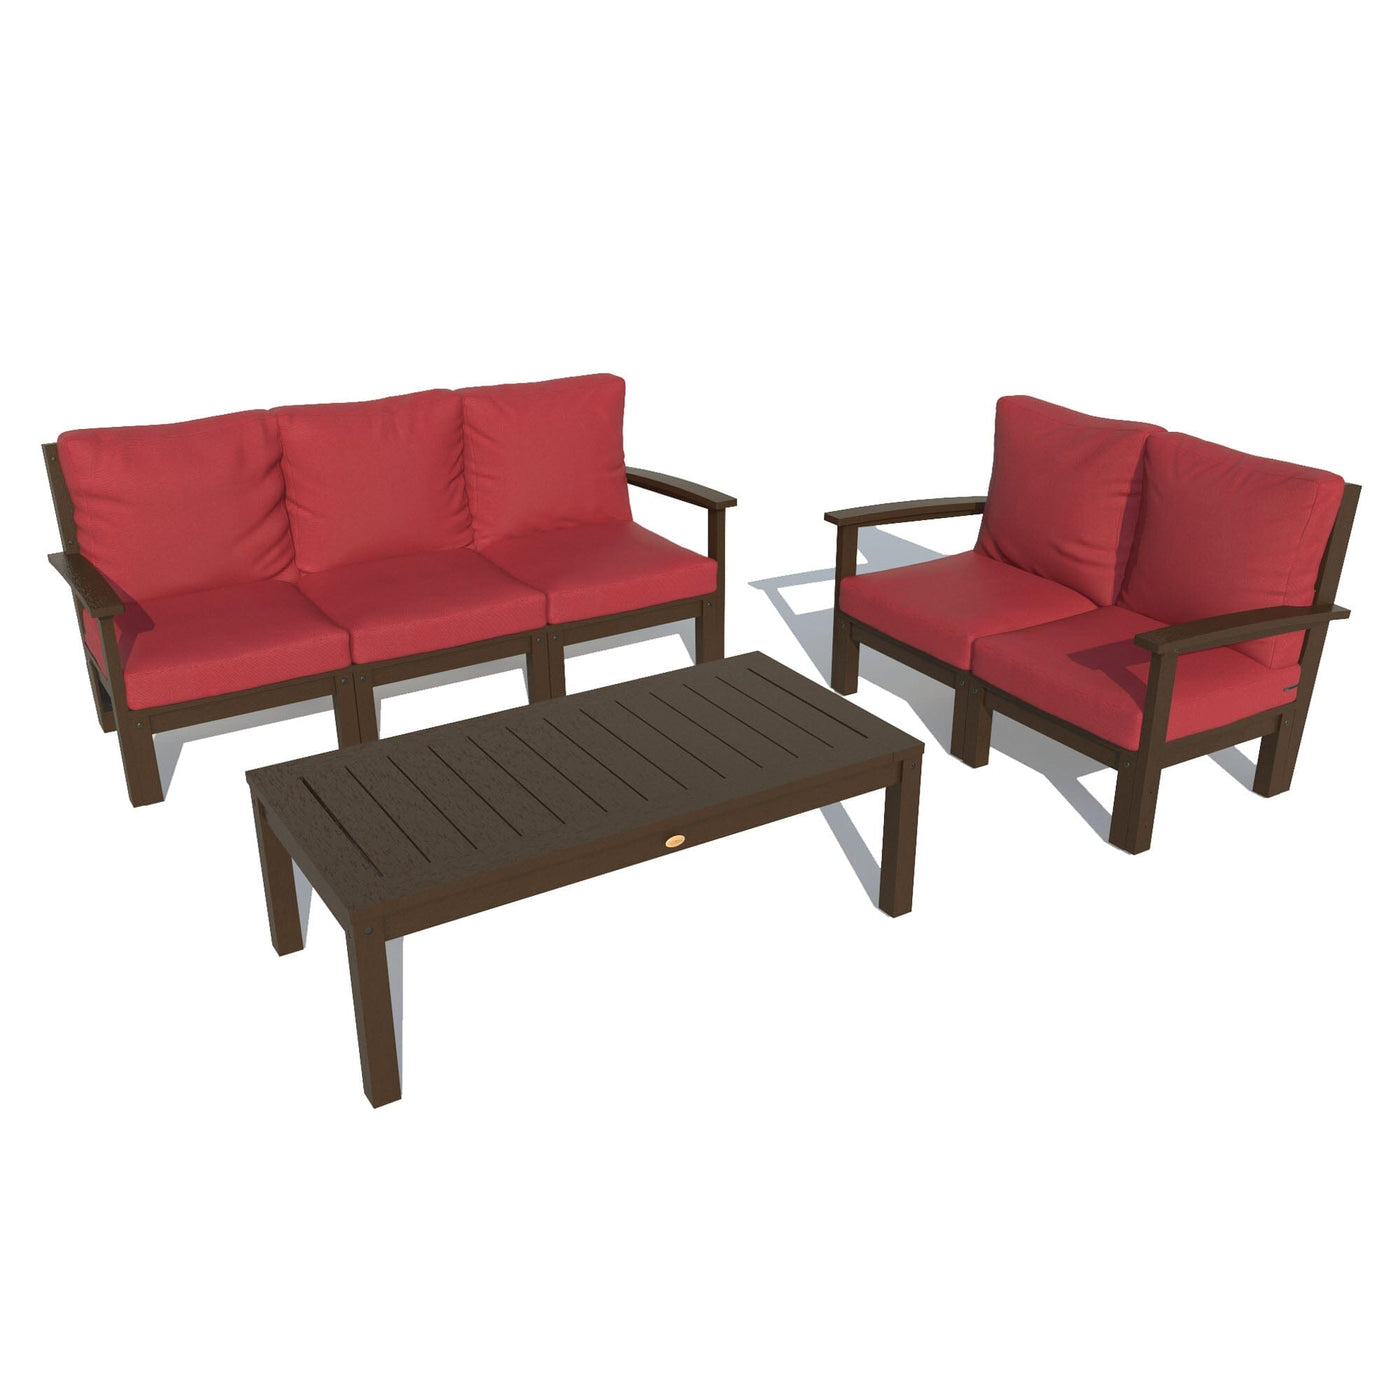 Bespoke Deep Seating: Sofa, Loveseat, and Conversation Table Deep Seating Highwood USA Firecracker Red Weathered Acorn 